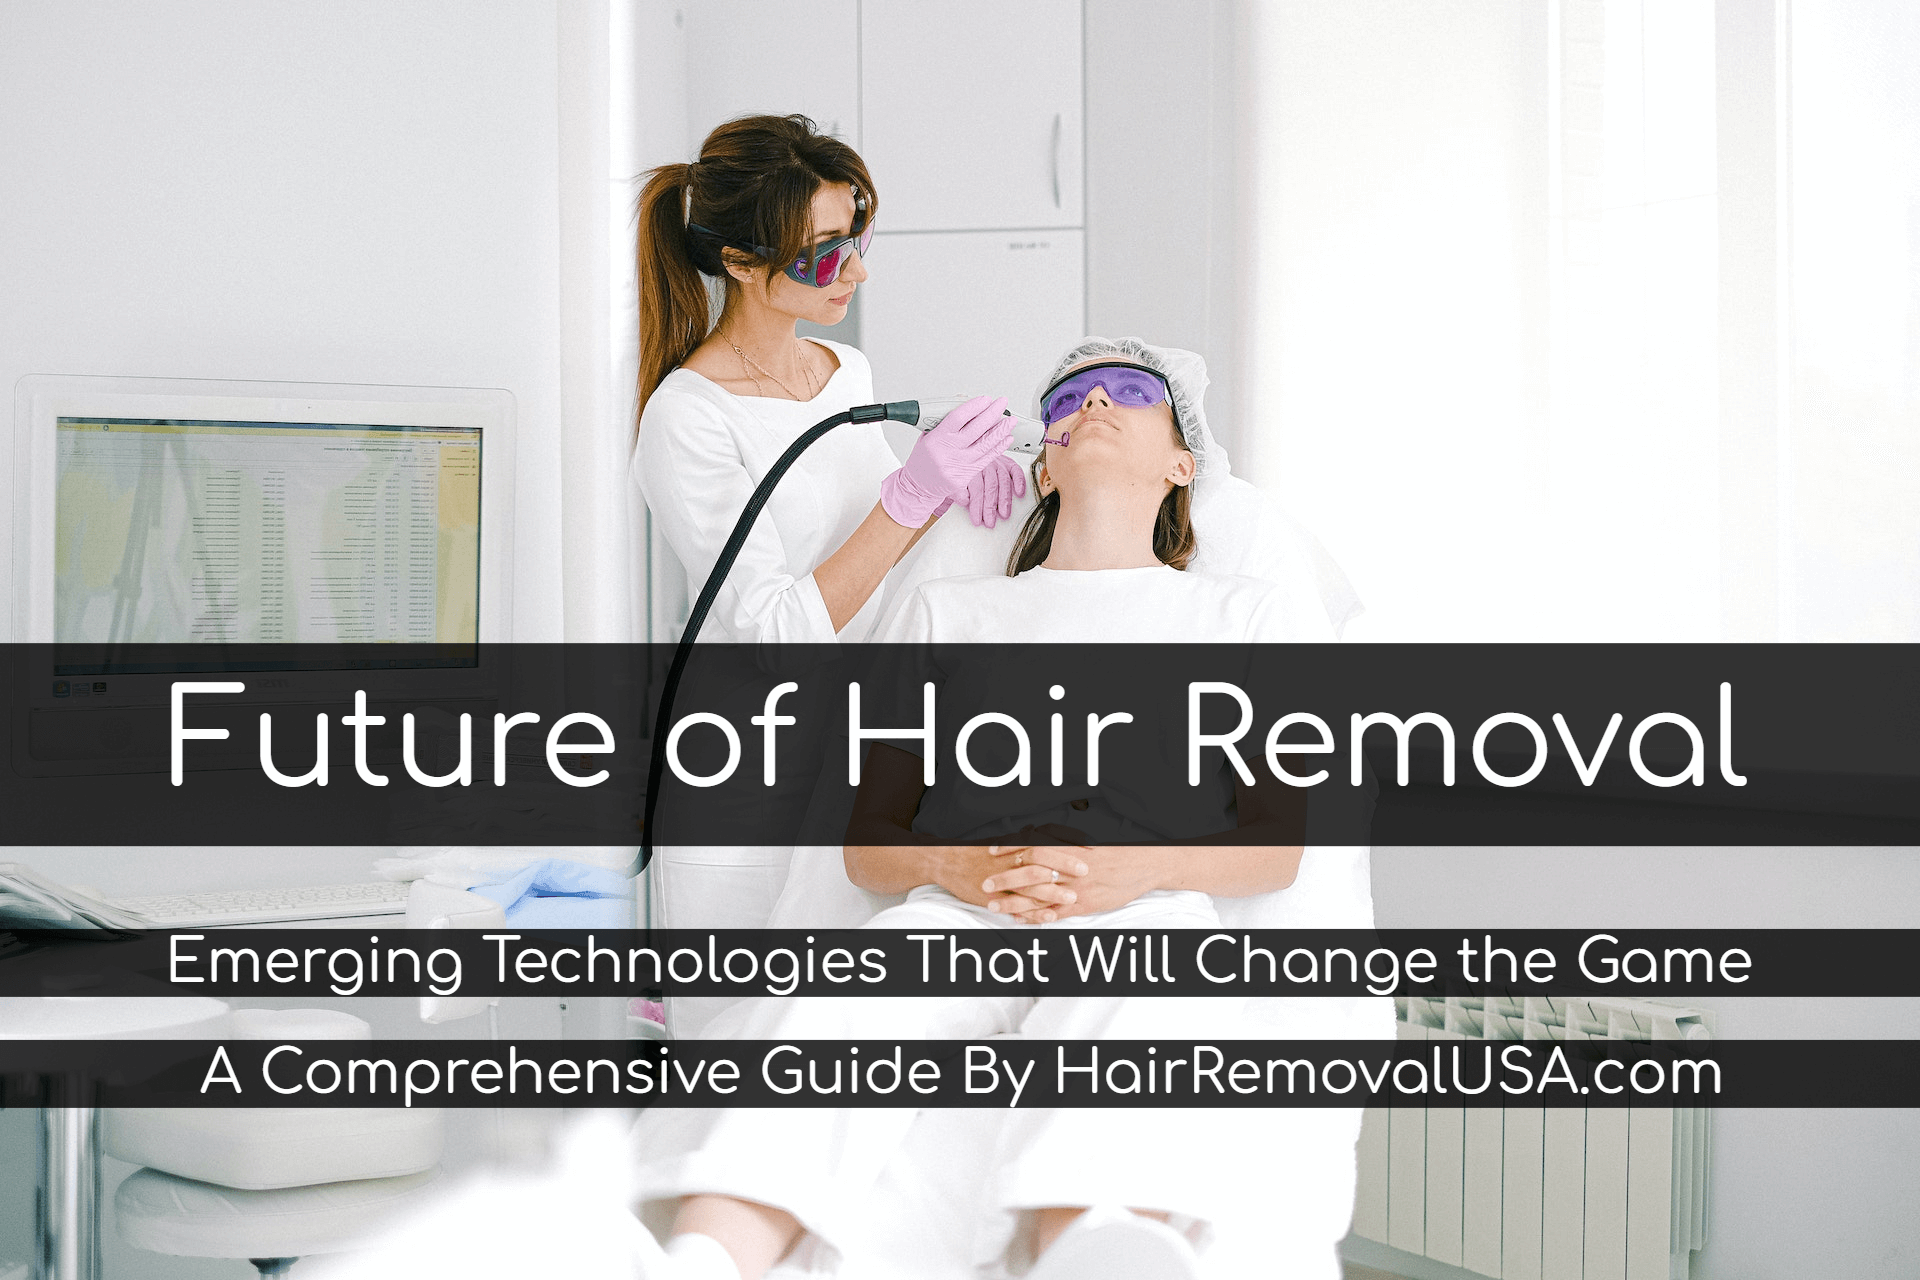 The Future of Hair Removal: Emerging Technologies to Watch